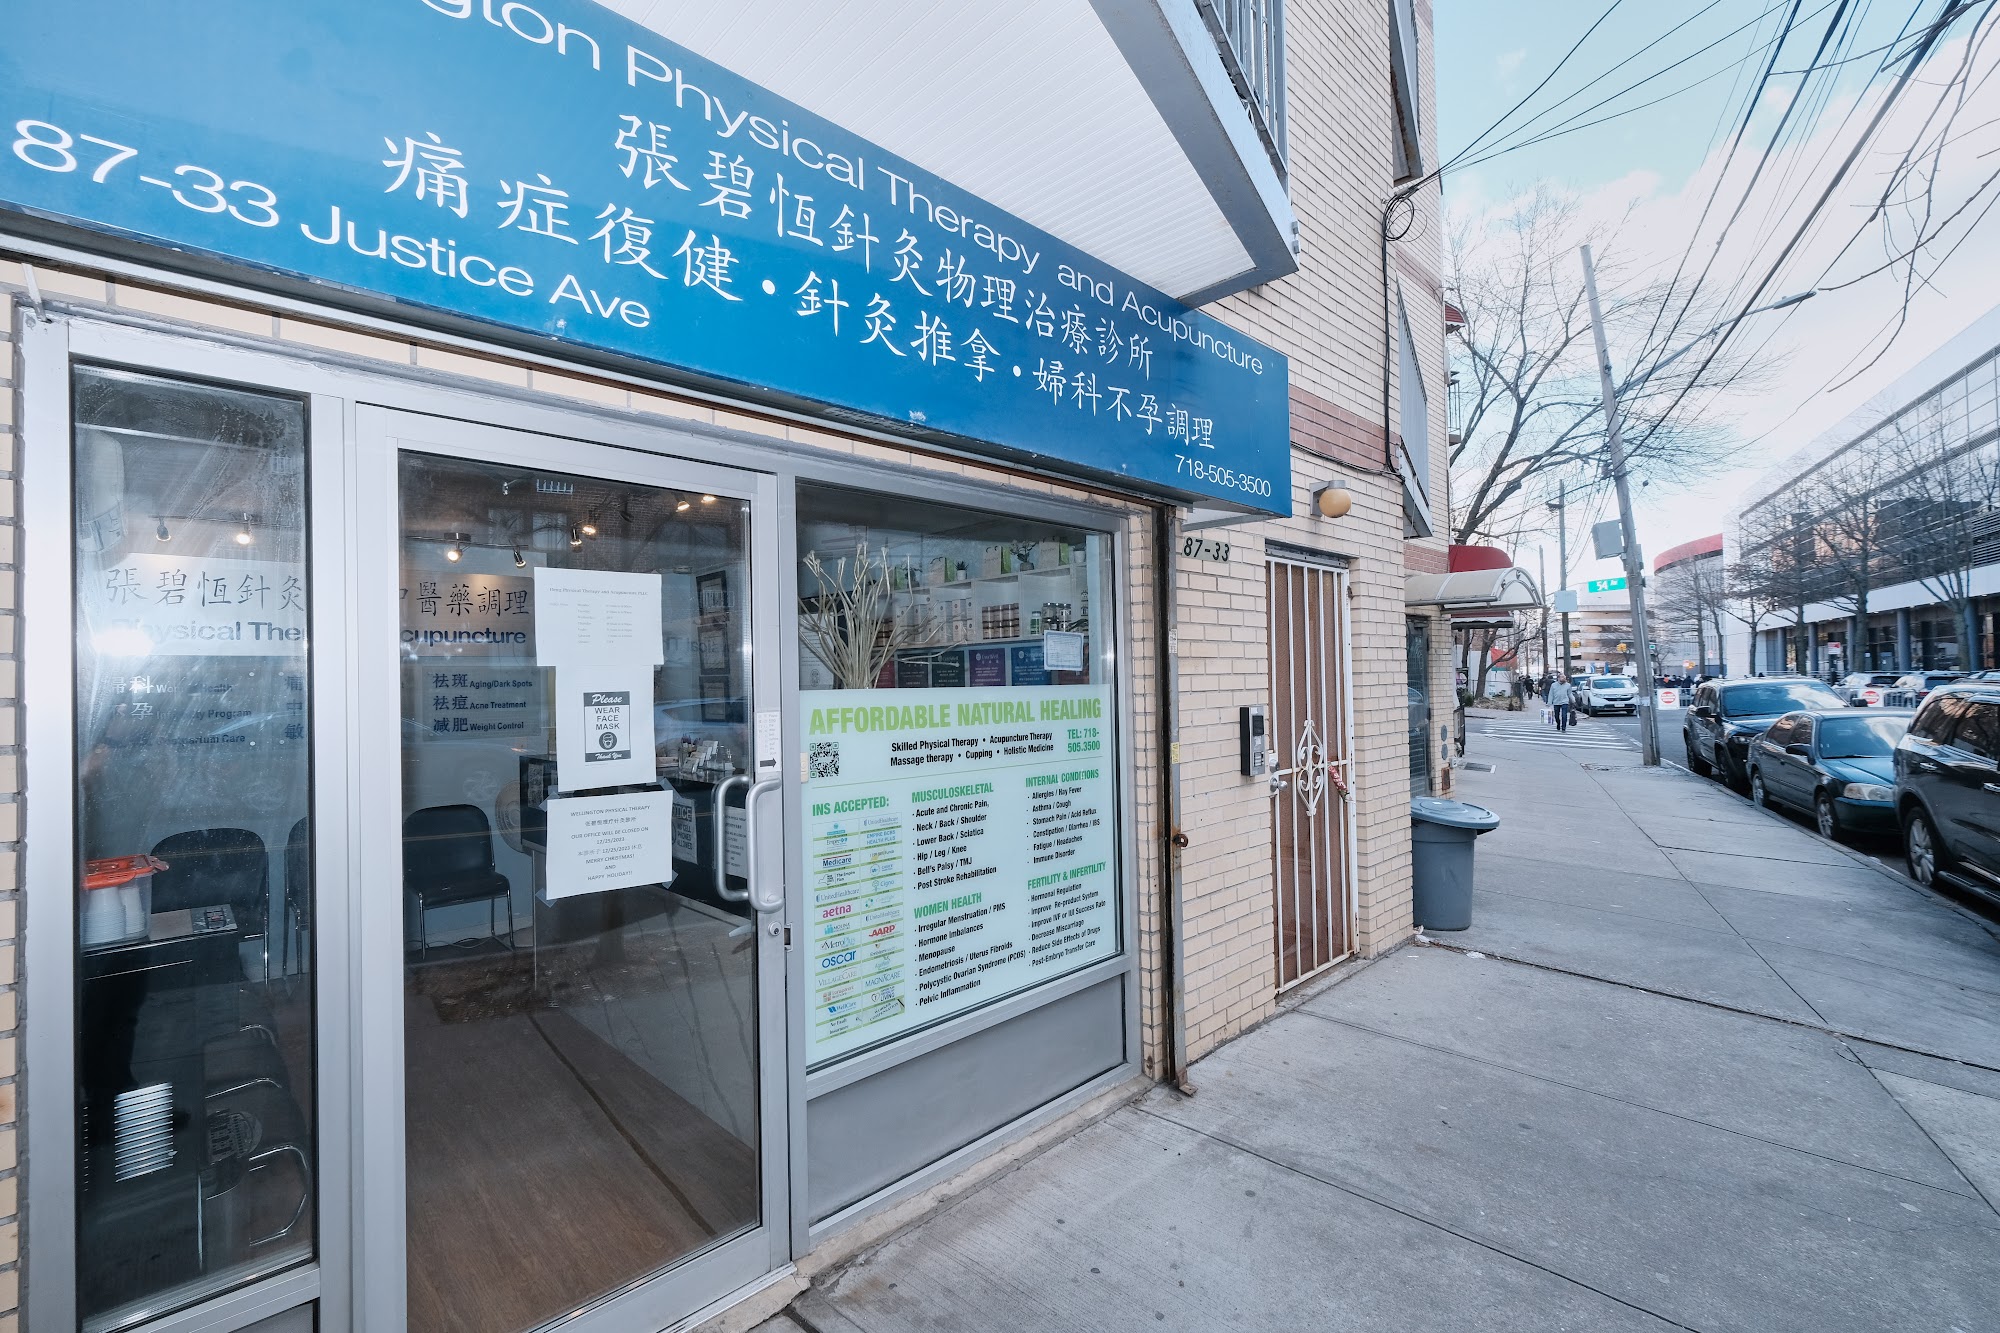 Wellington Physical Therapy& Acupuncture/张碧恒中医诊所：gua sha;tcm;moxibustion;Acupuncture;infertility;fertility;dr;doctor;therapy